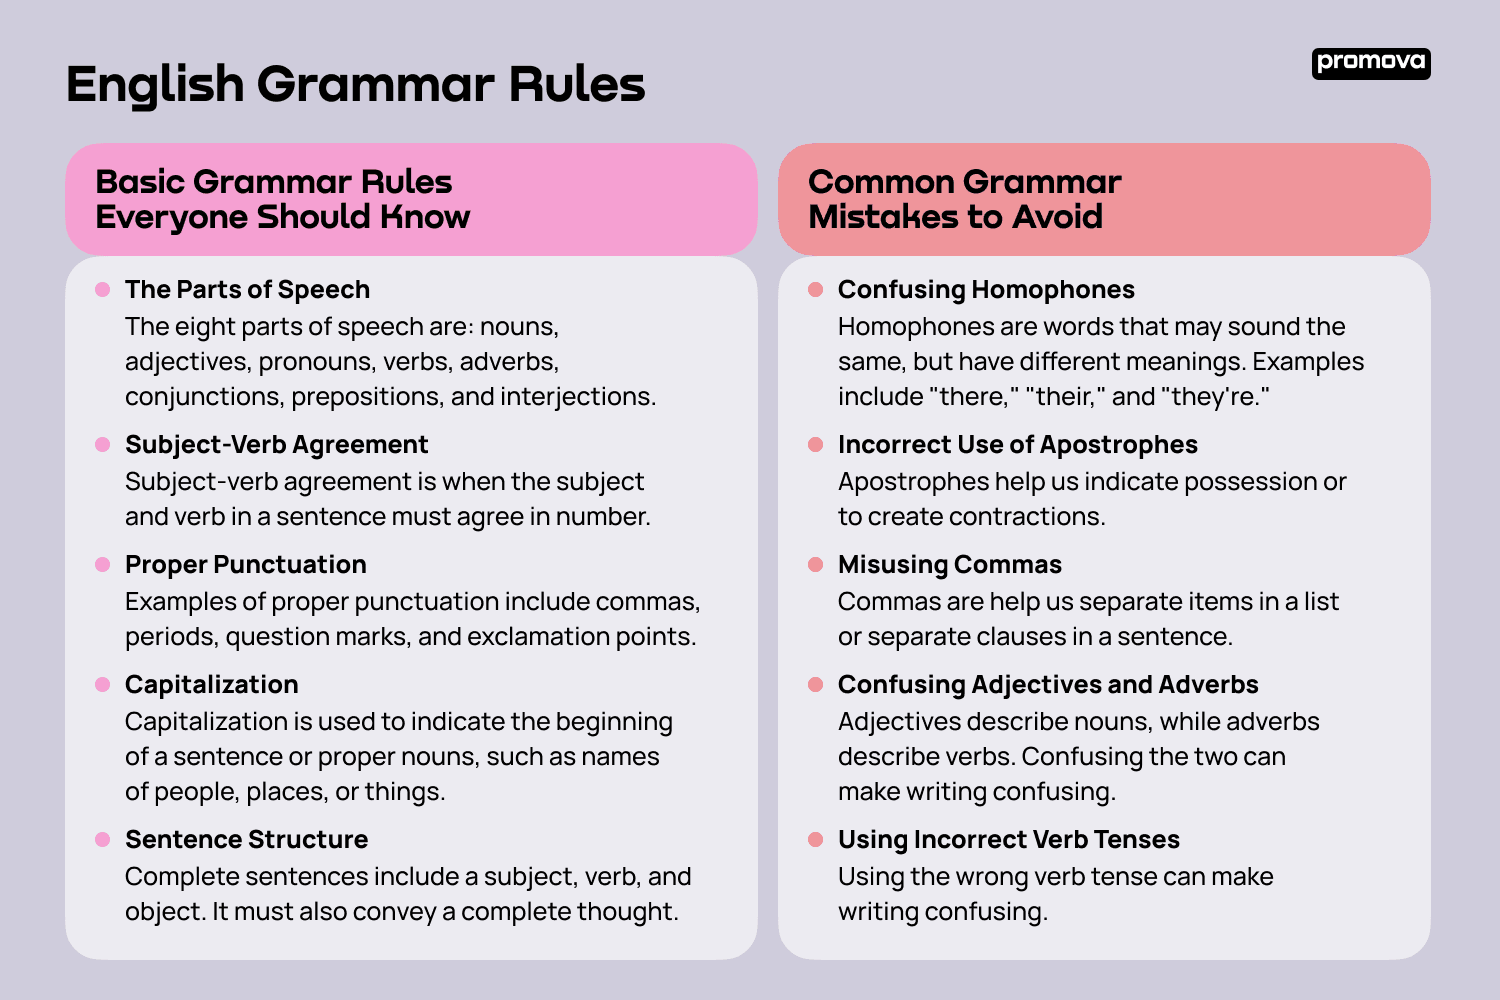 Basic Grammar Rules Everyone Should Know